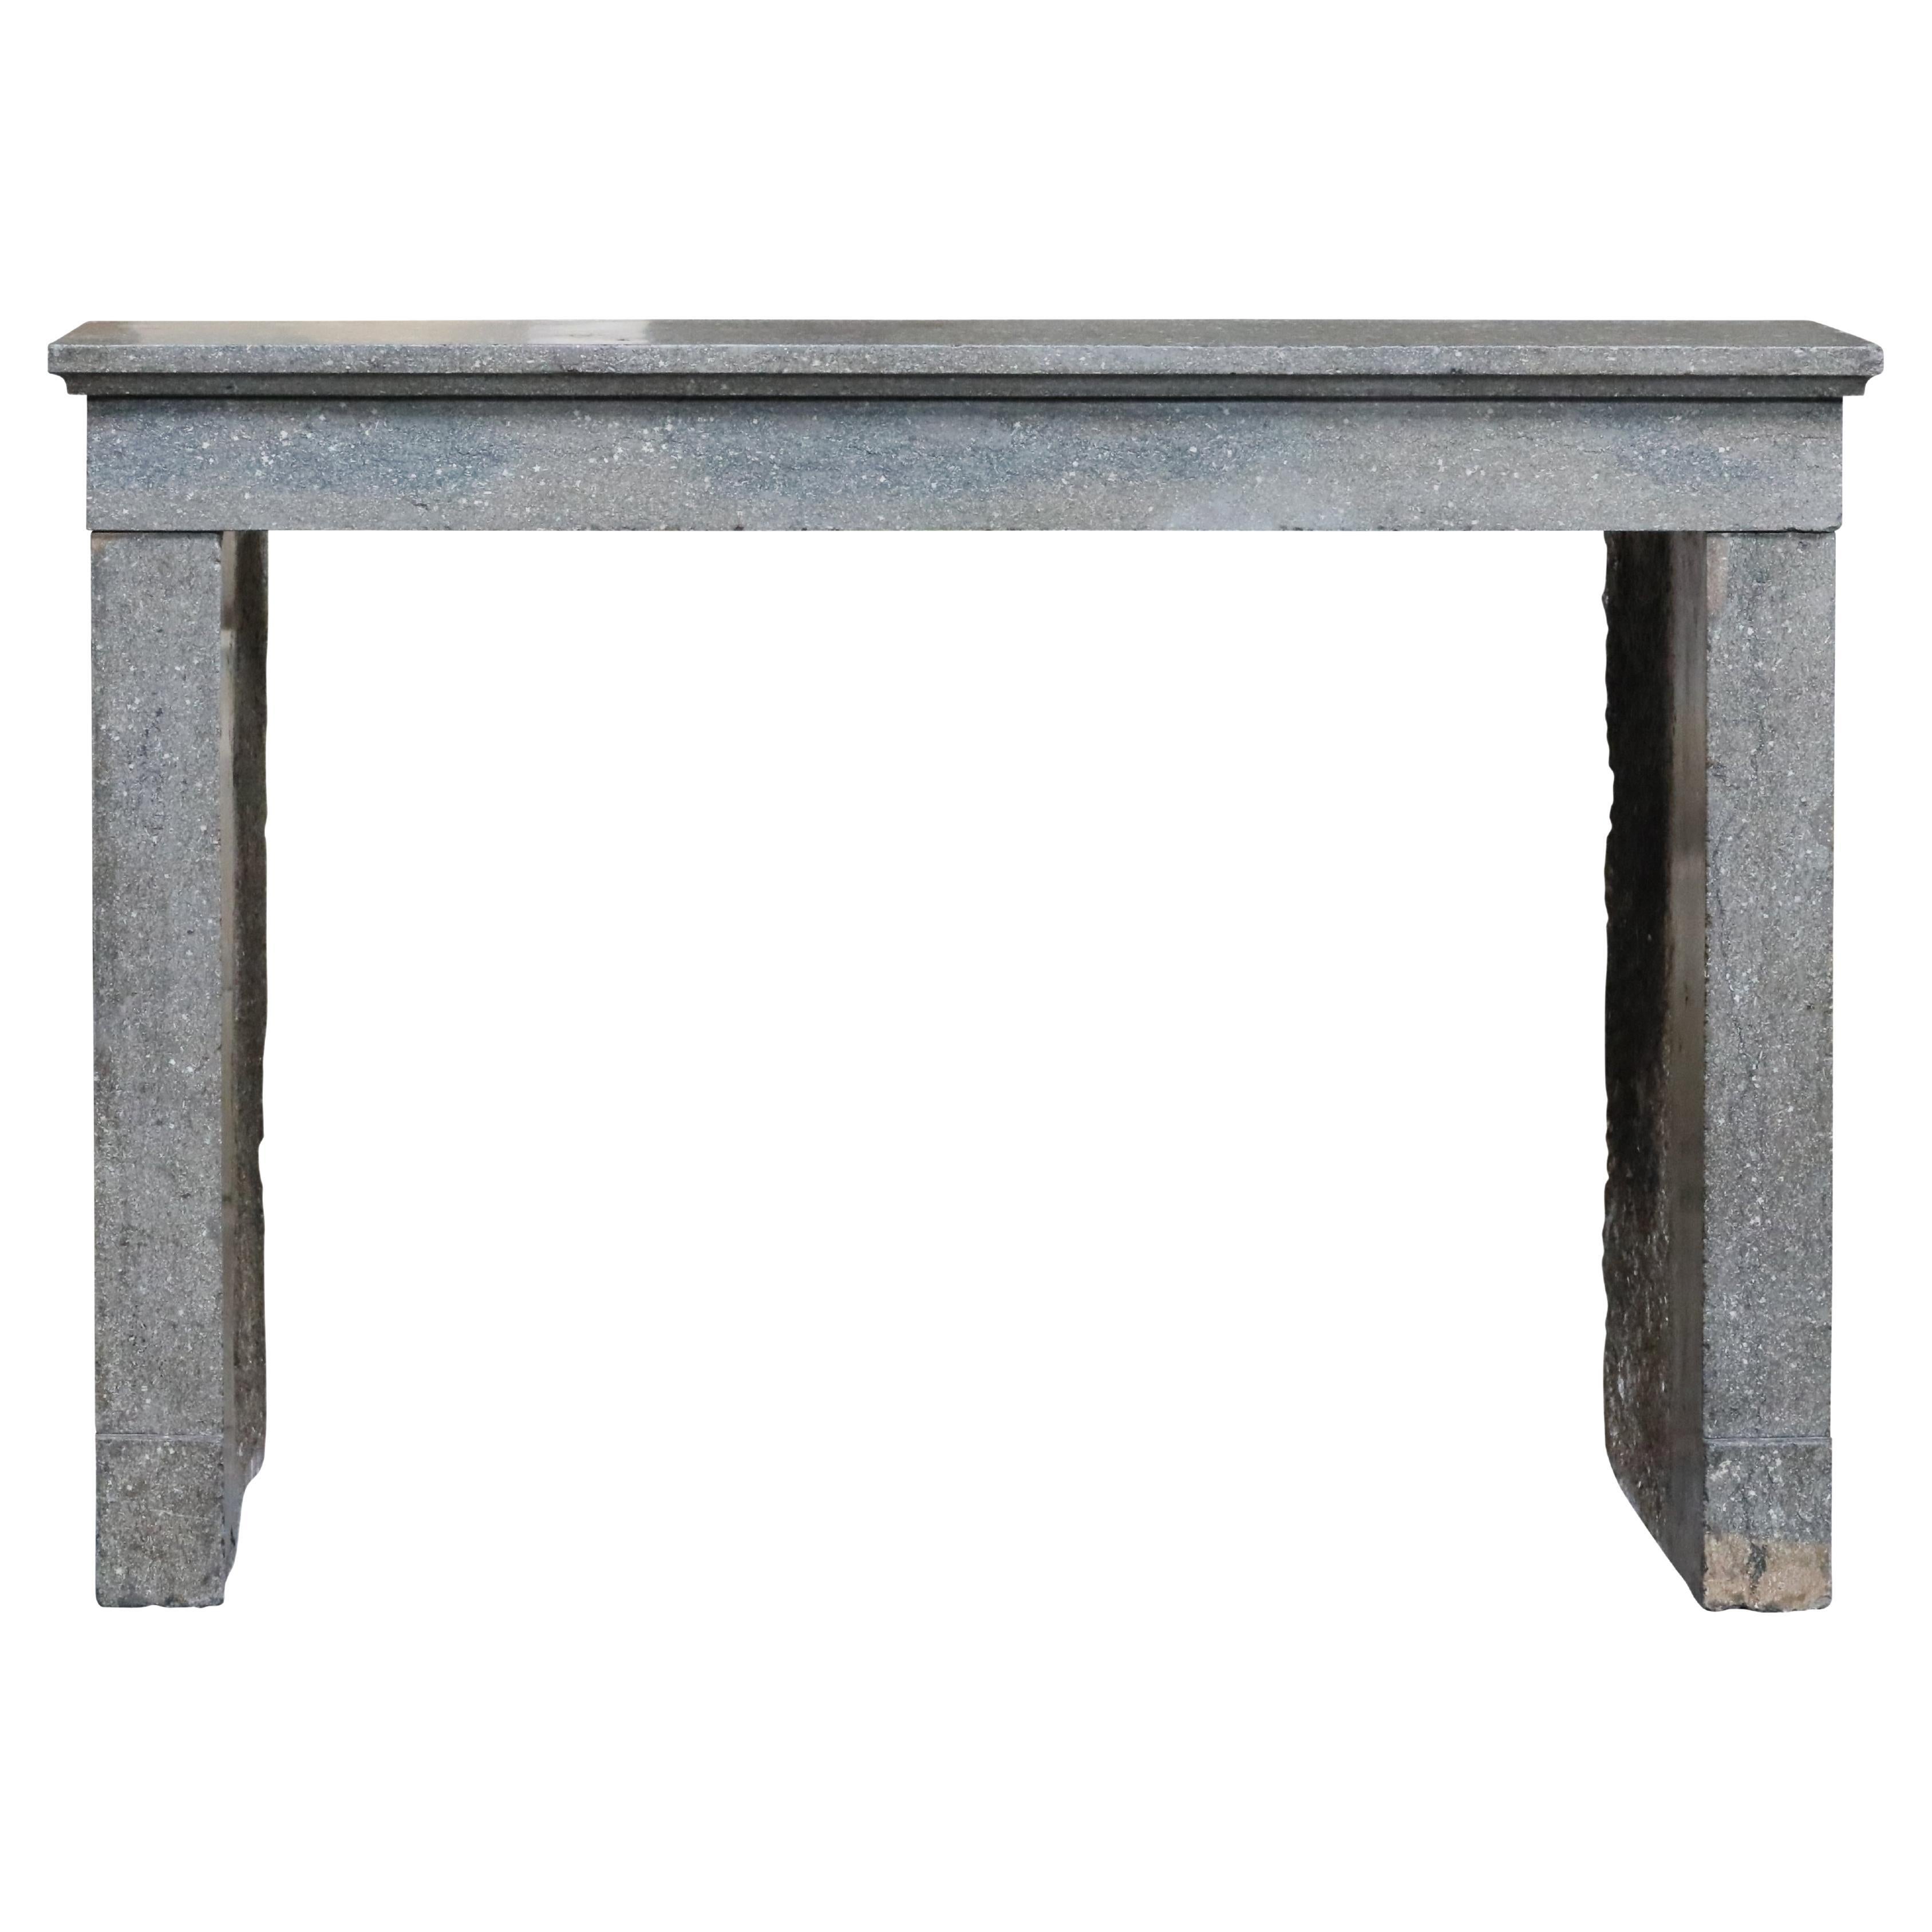 Original Timeless French Antique Fireplace Surround in Stone im Angebot